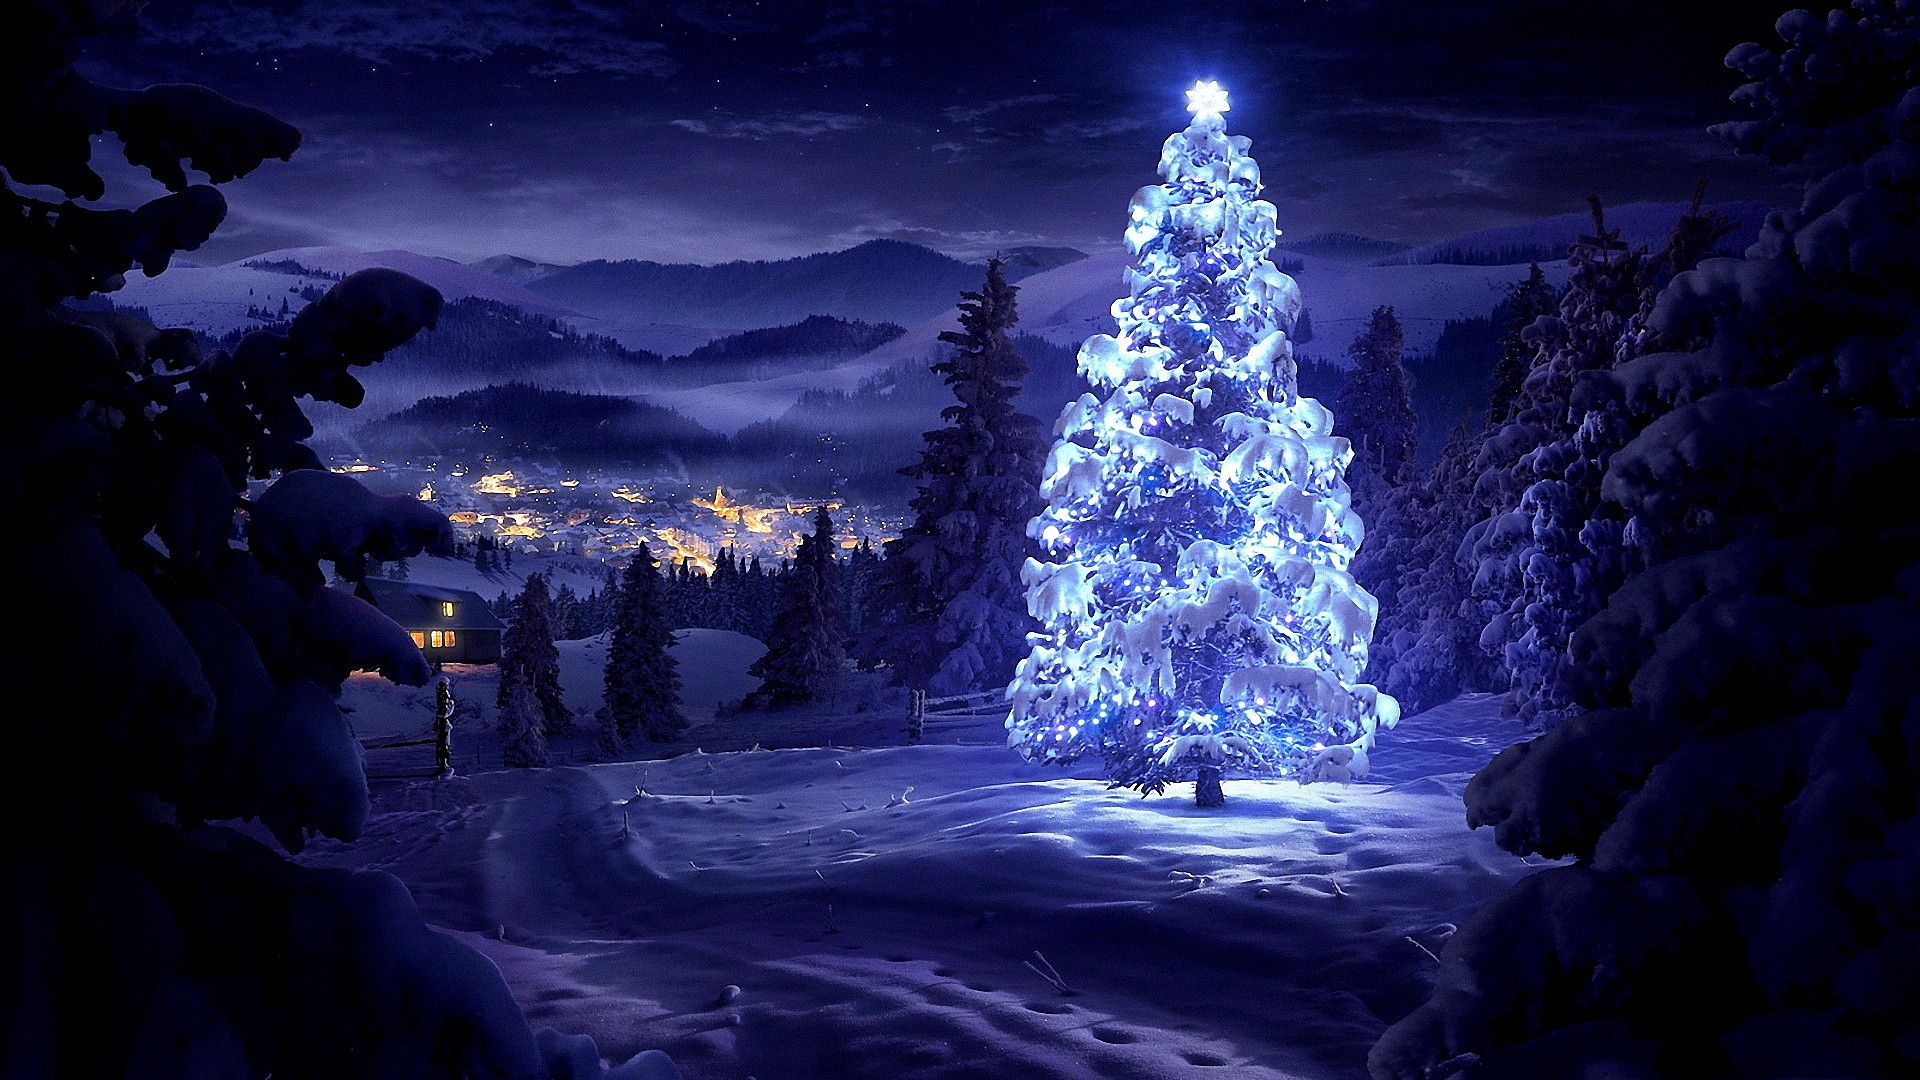 Christmas tree wallpaper. To download background natural scenery desktop